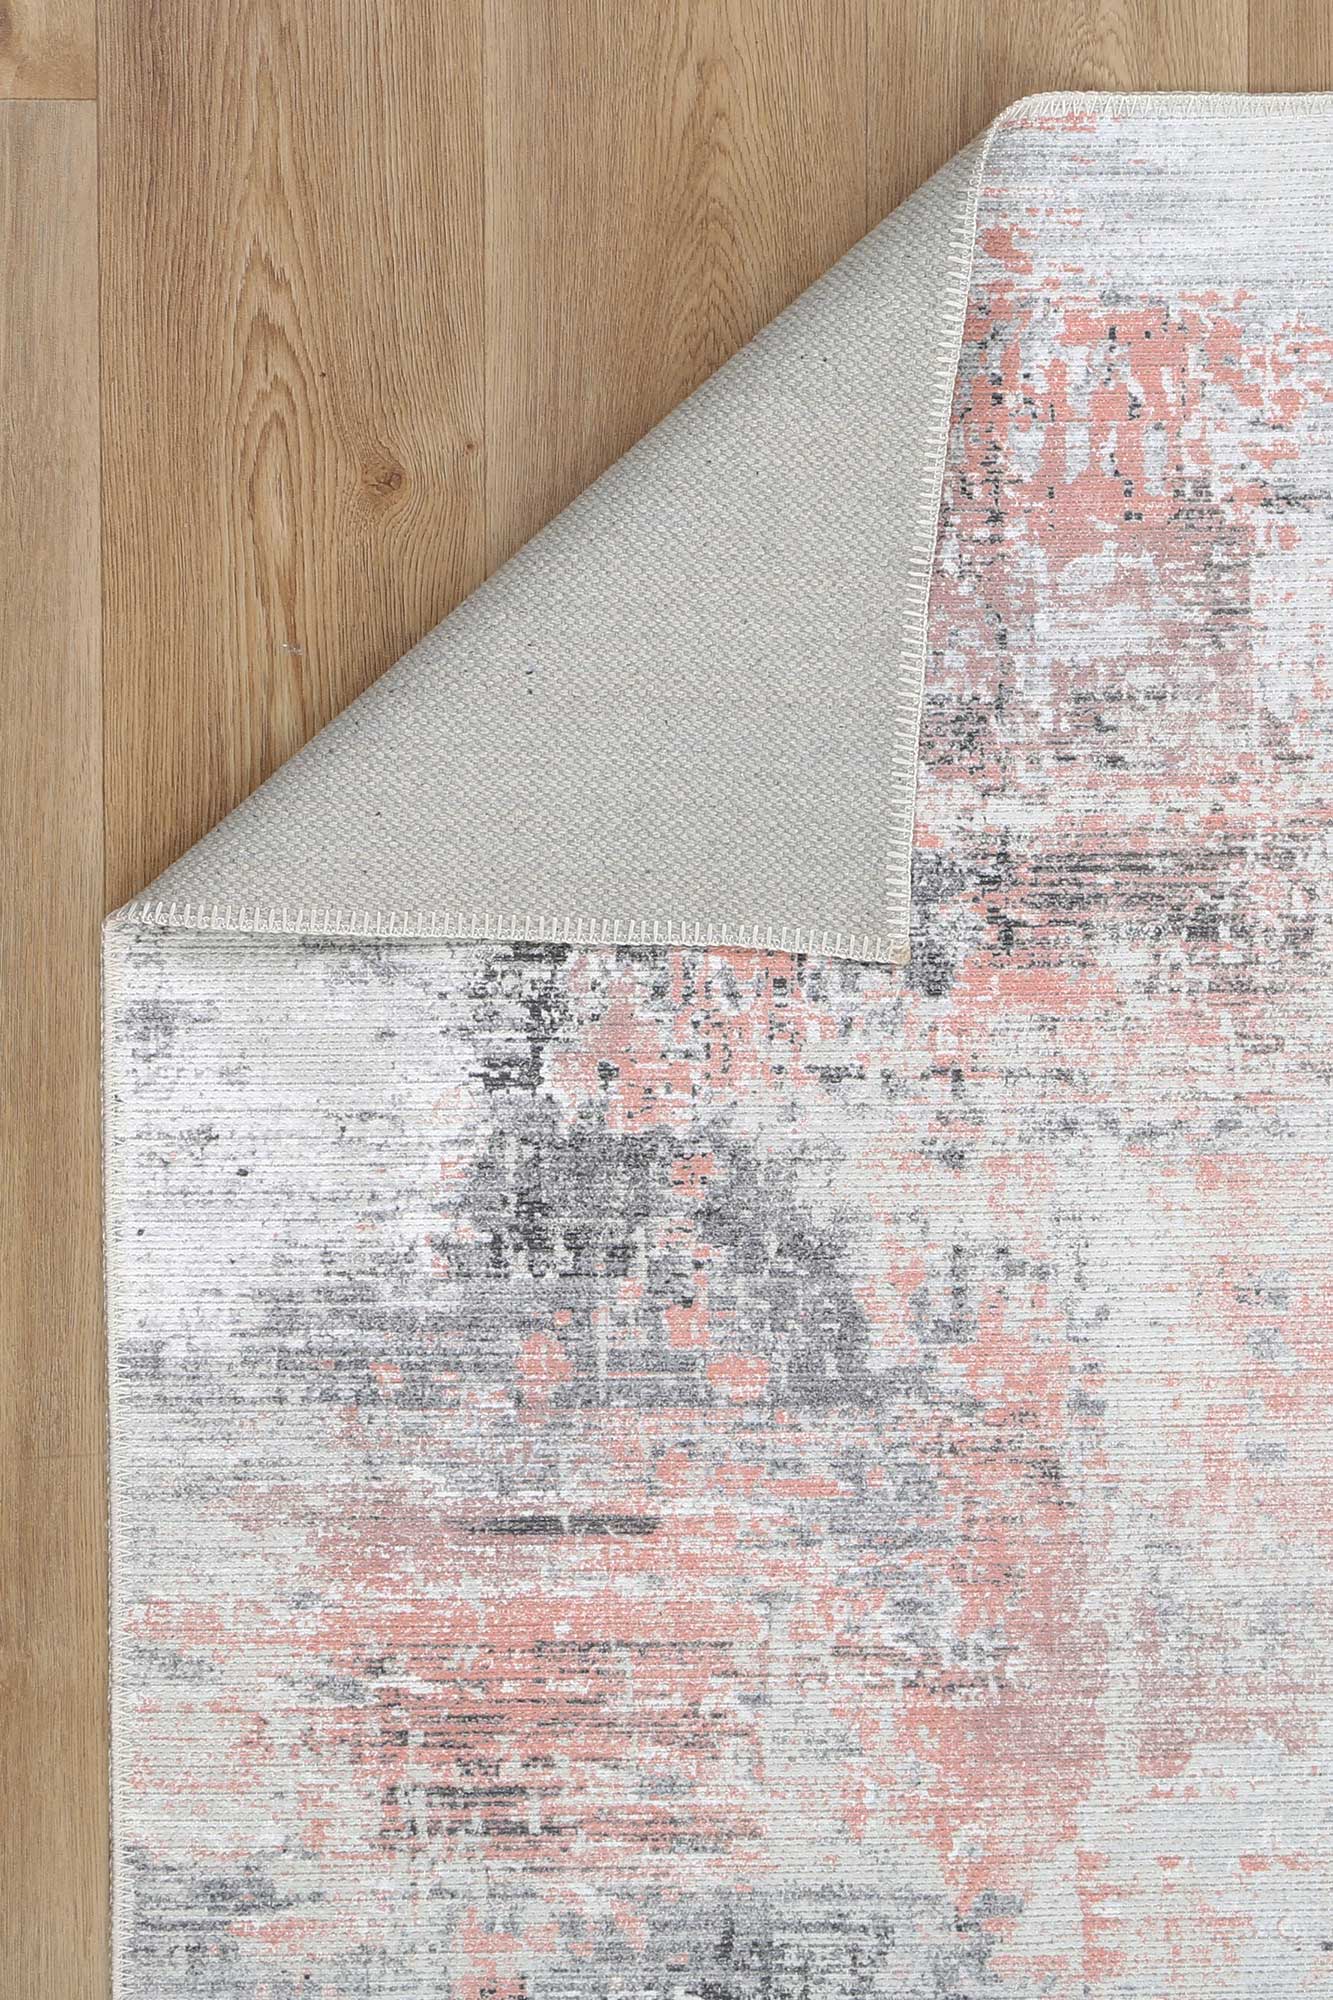 Elevate your home decor with the Abstract Celine Blush Rug. Made from recycled cotton with pink, grey, and cream abstract design. Stain and water-resistant with NanoWipe technology, machine washable, and anti-allergen for easy maintenance.